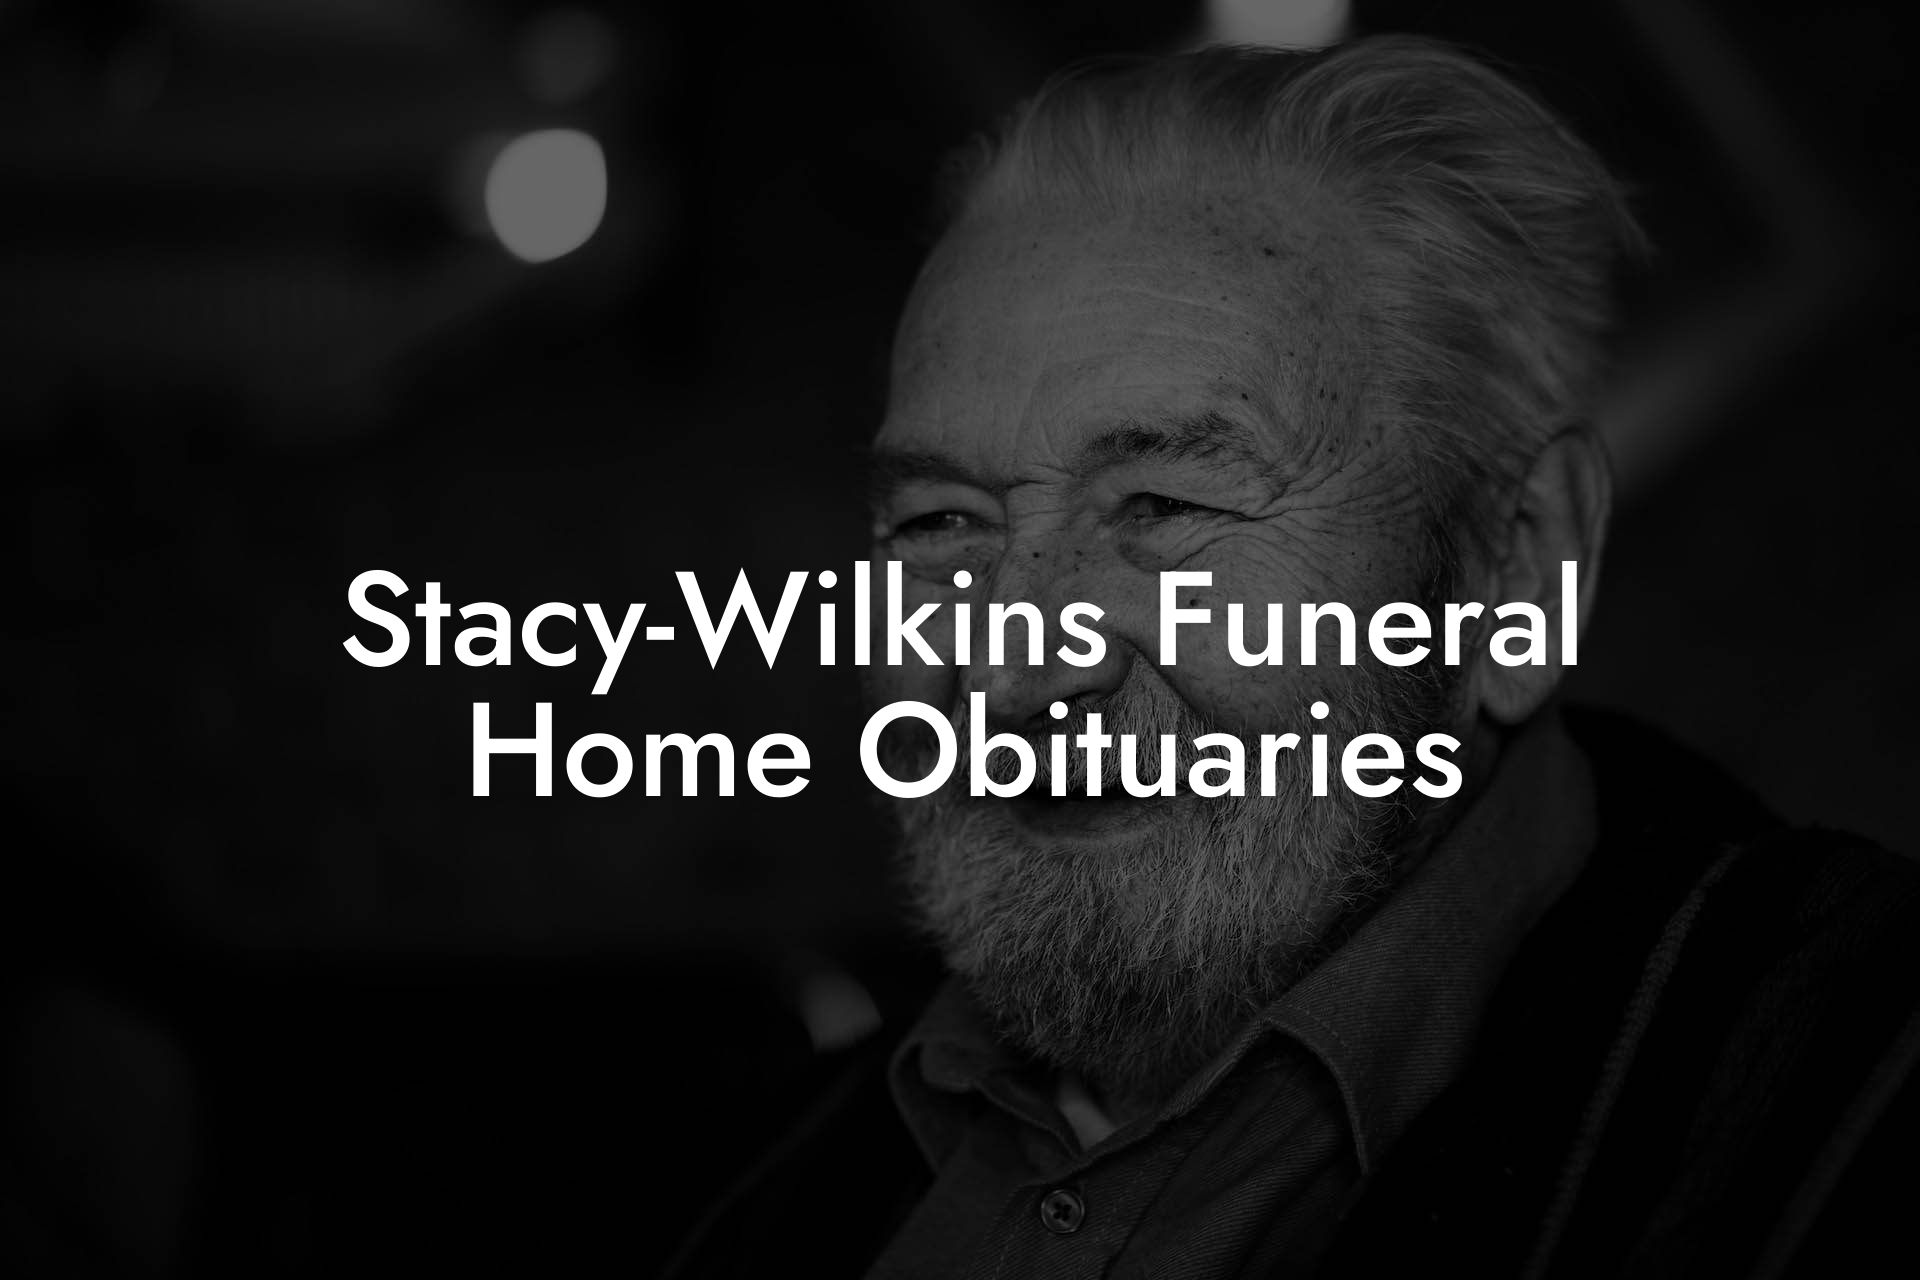 Stacy-Wilkins Funeral Home Obituaries